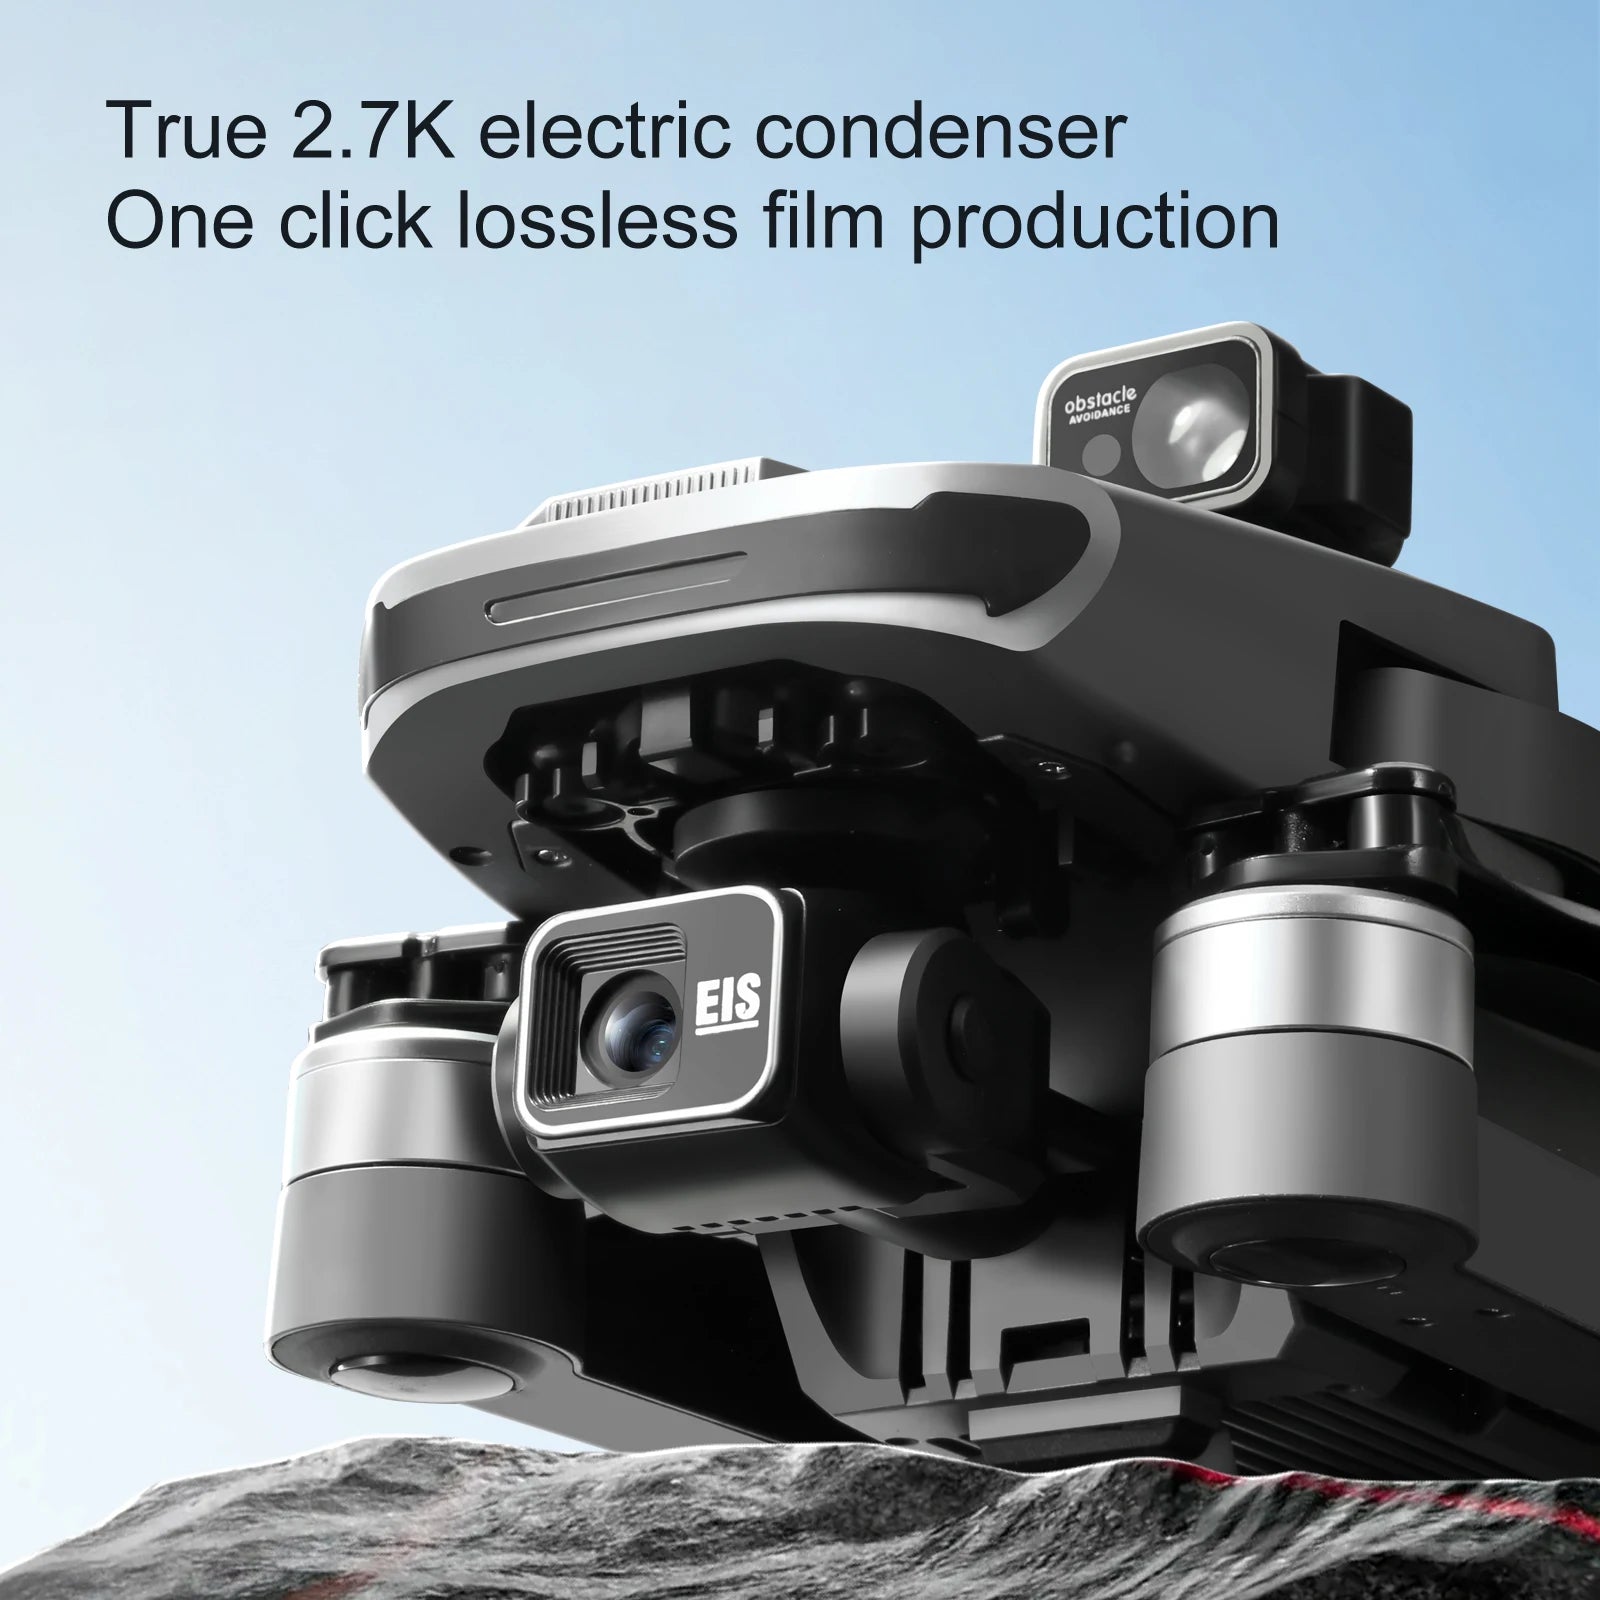 S155 Pro GPS Drone, True 2.7K electric condenser One click lossless film production obstacle avoidance E